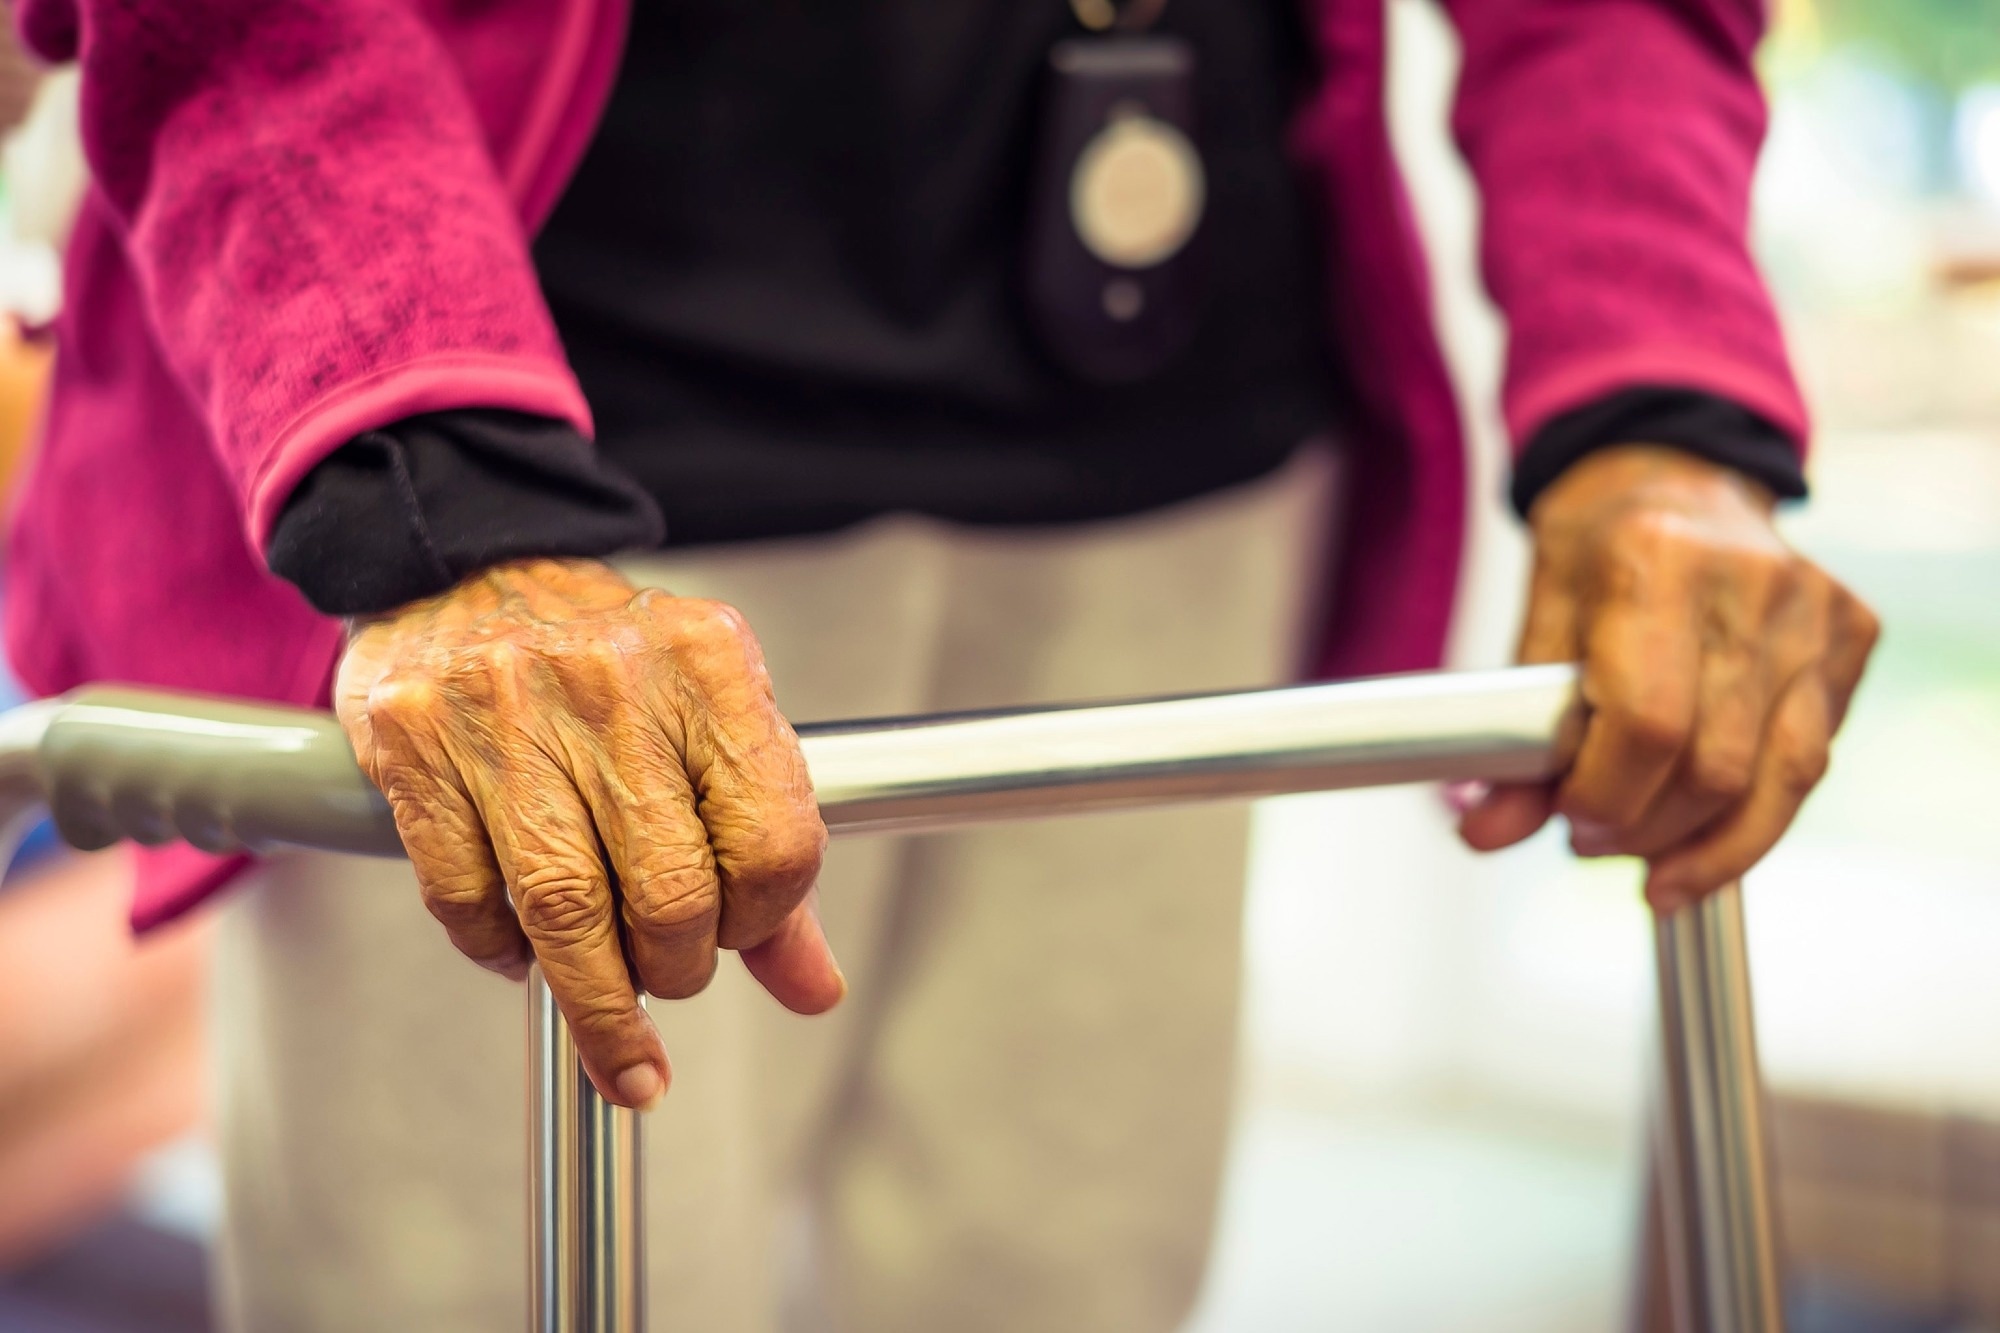 Study: Frailty before and during austerity: A time series analysis of the English Longitudinal Study of Ageing 2002–2018. Image Credit: Paul Maguire/Shutterstock.com